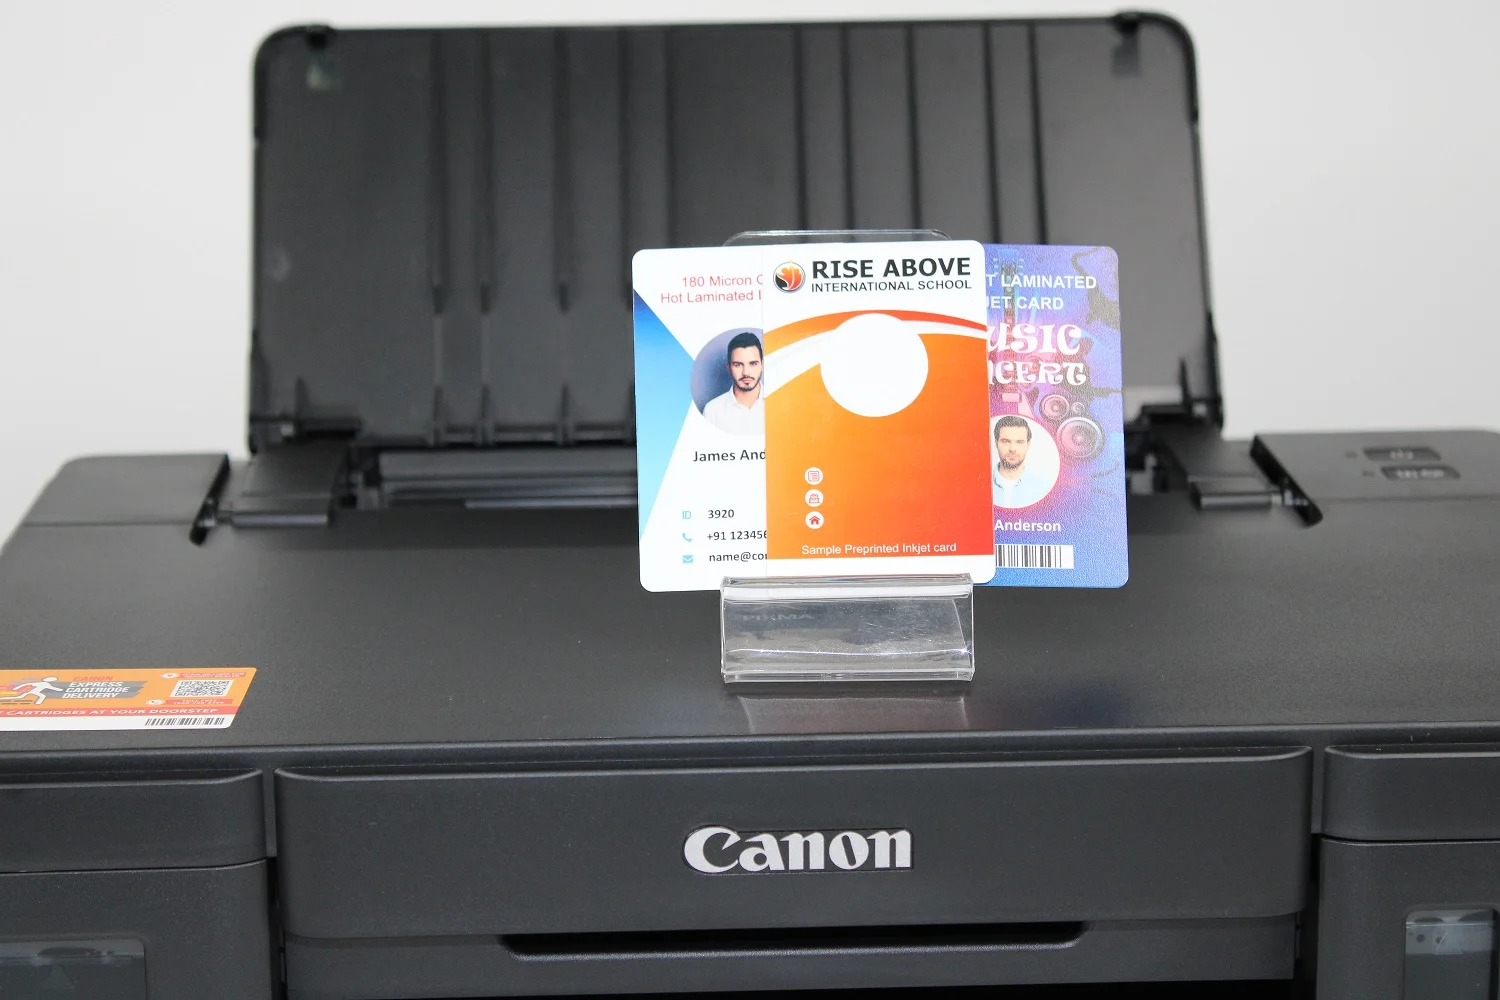 canon-g1010-pvc-id-card-printer-without-tray-buy-canon-printer-high